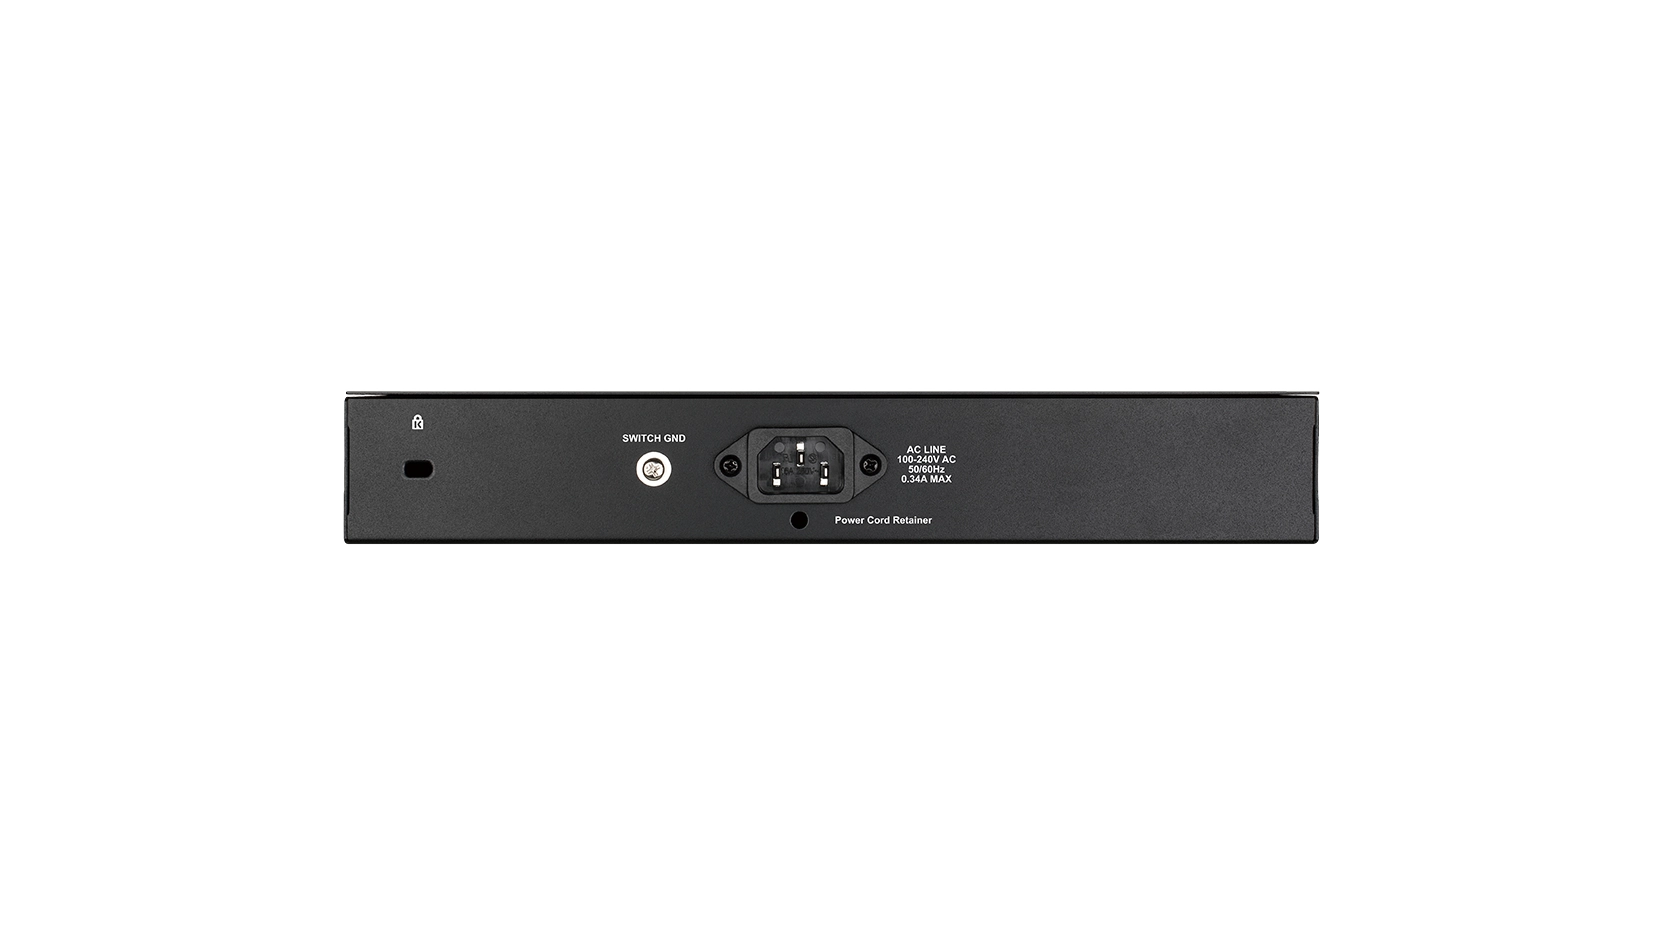 D-Link Web Smart DGS-1210-08P - Switch - managed - 8 x 10/100/1000 PoE+ 2 Gigabit - Switch - 1 Gbps